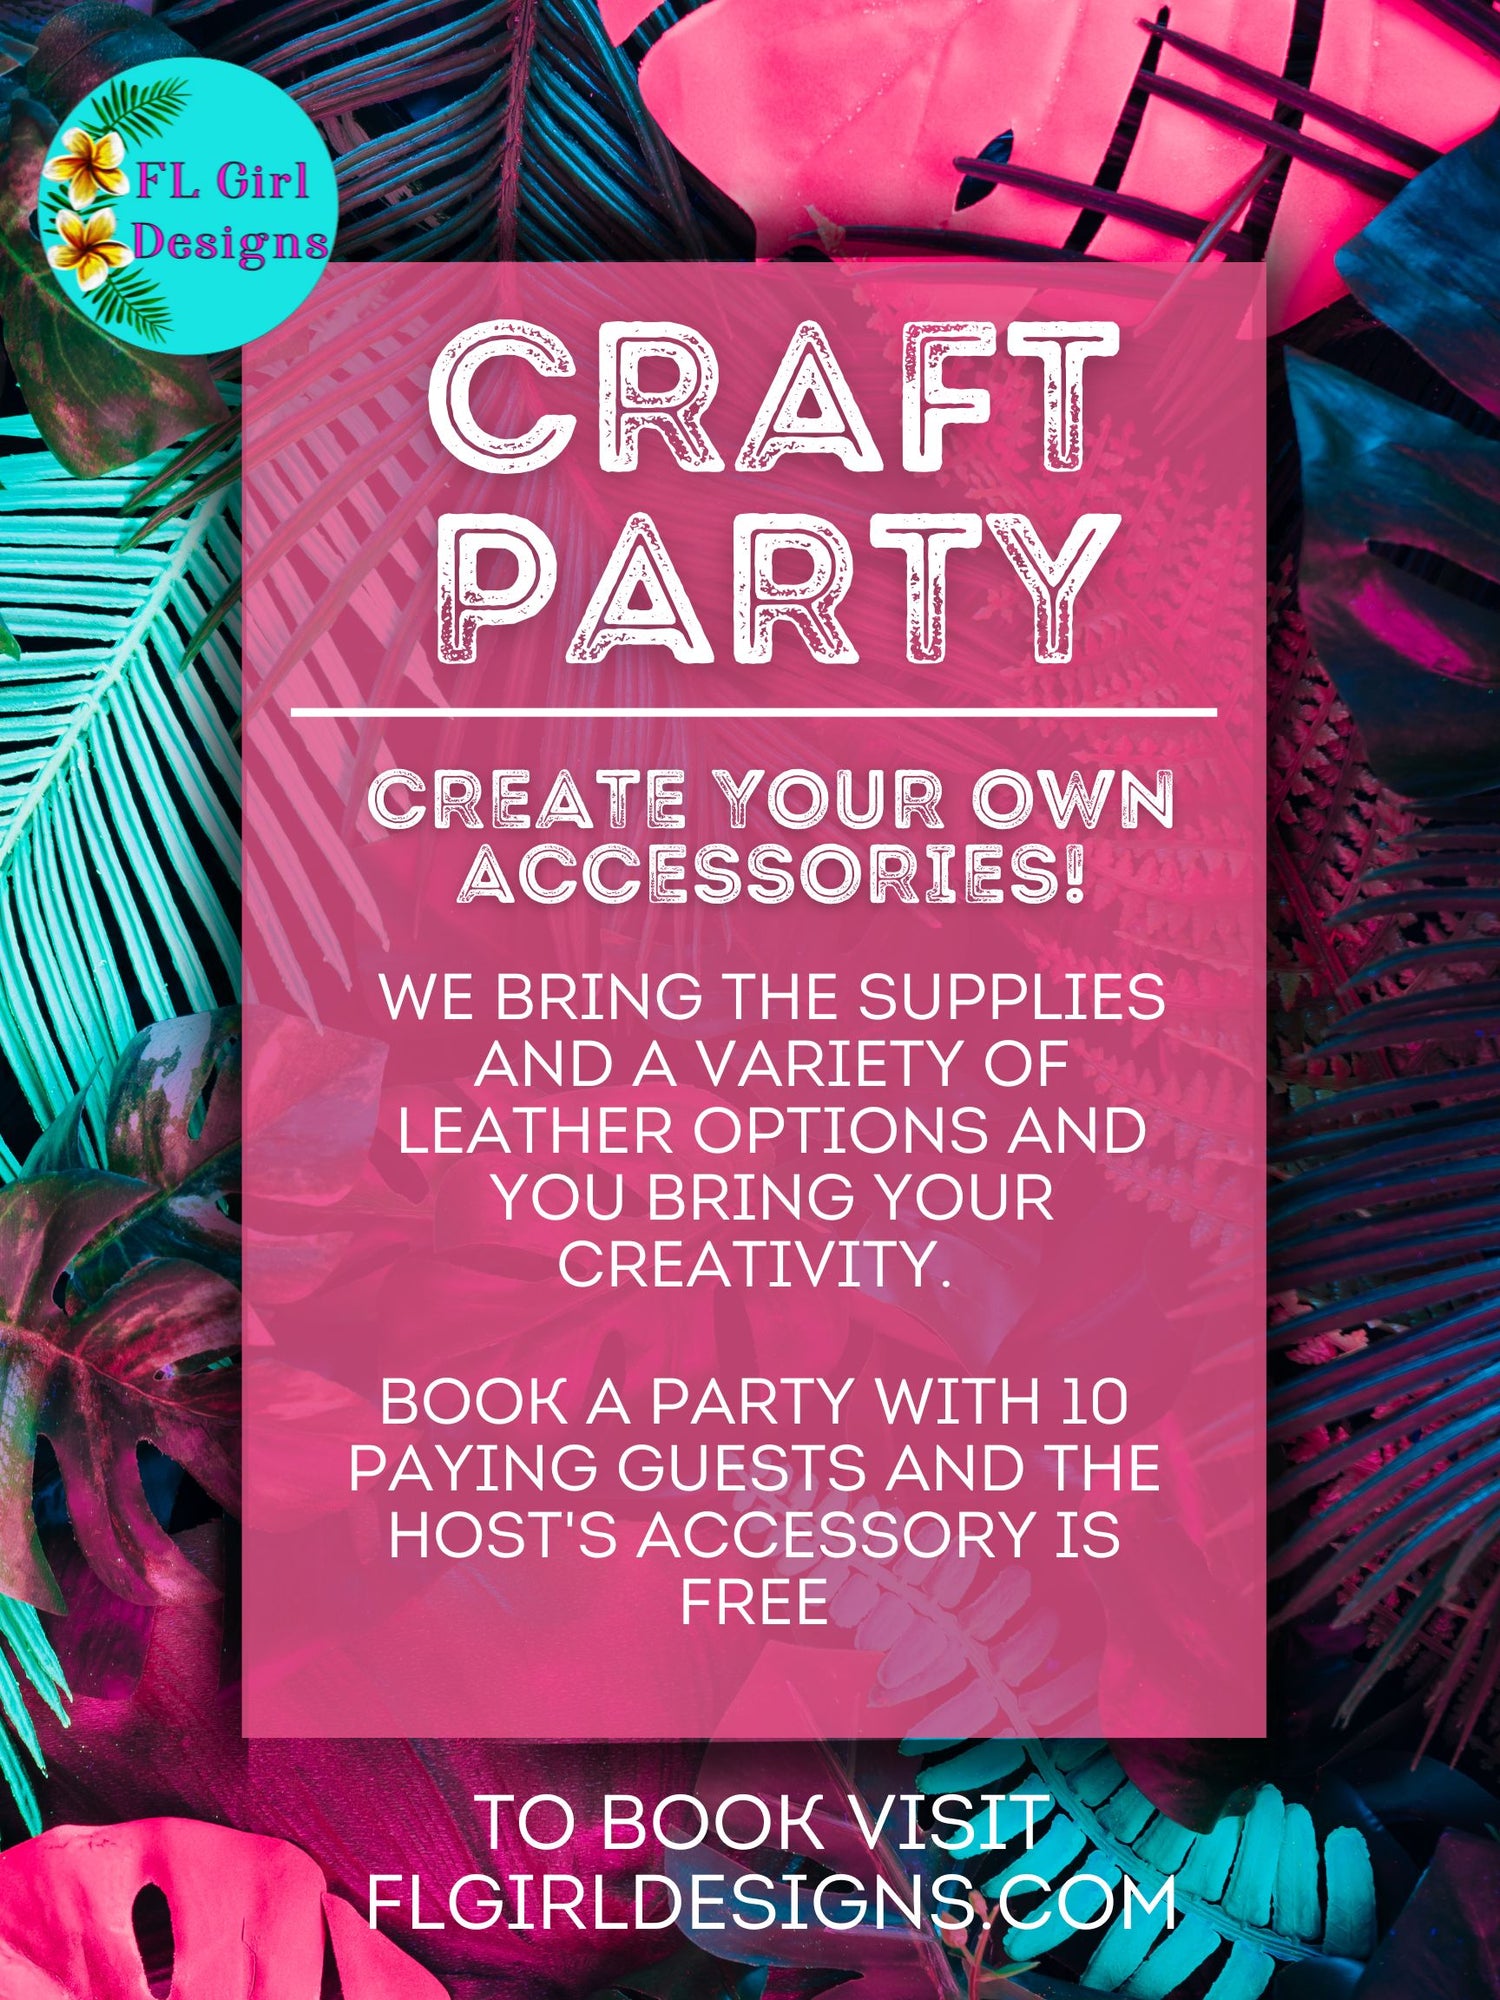 Create your own accessories at FL Girl Designs Craft Party